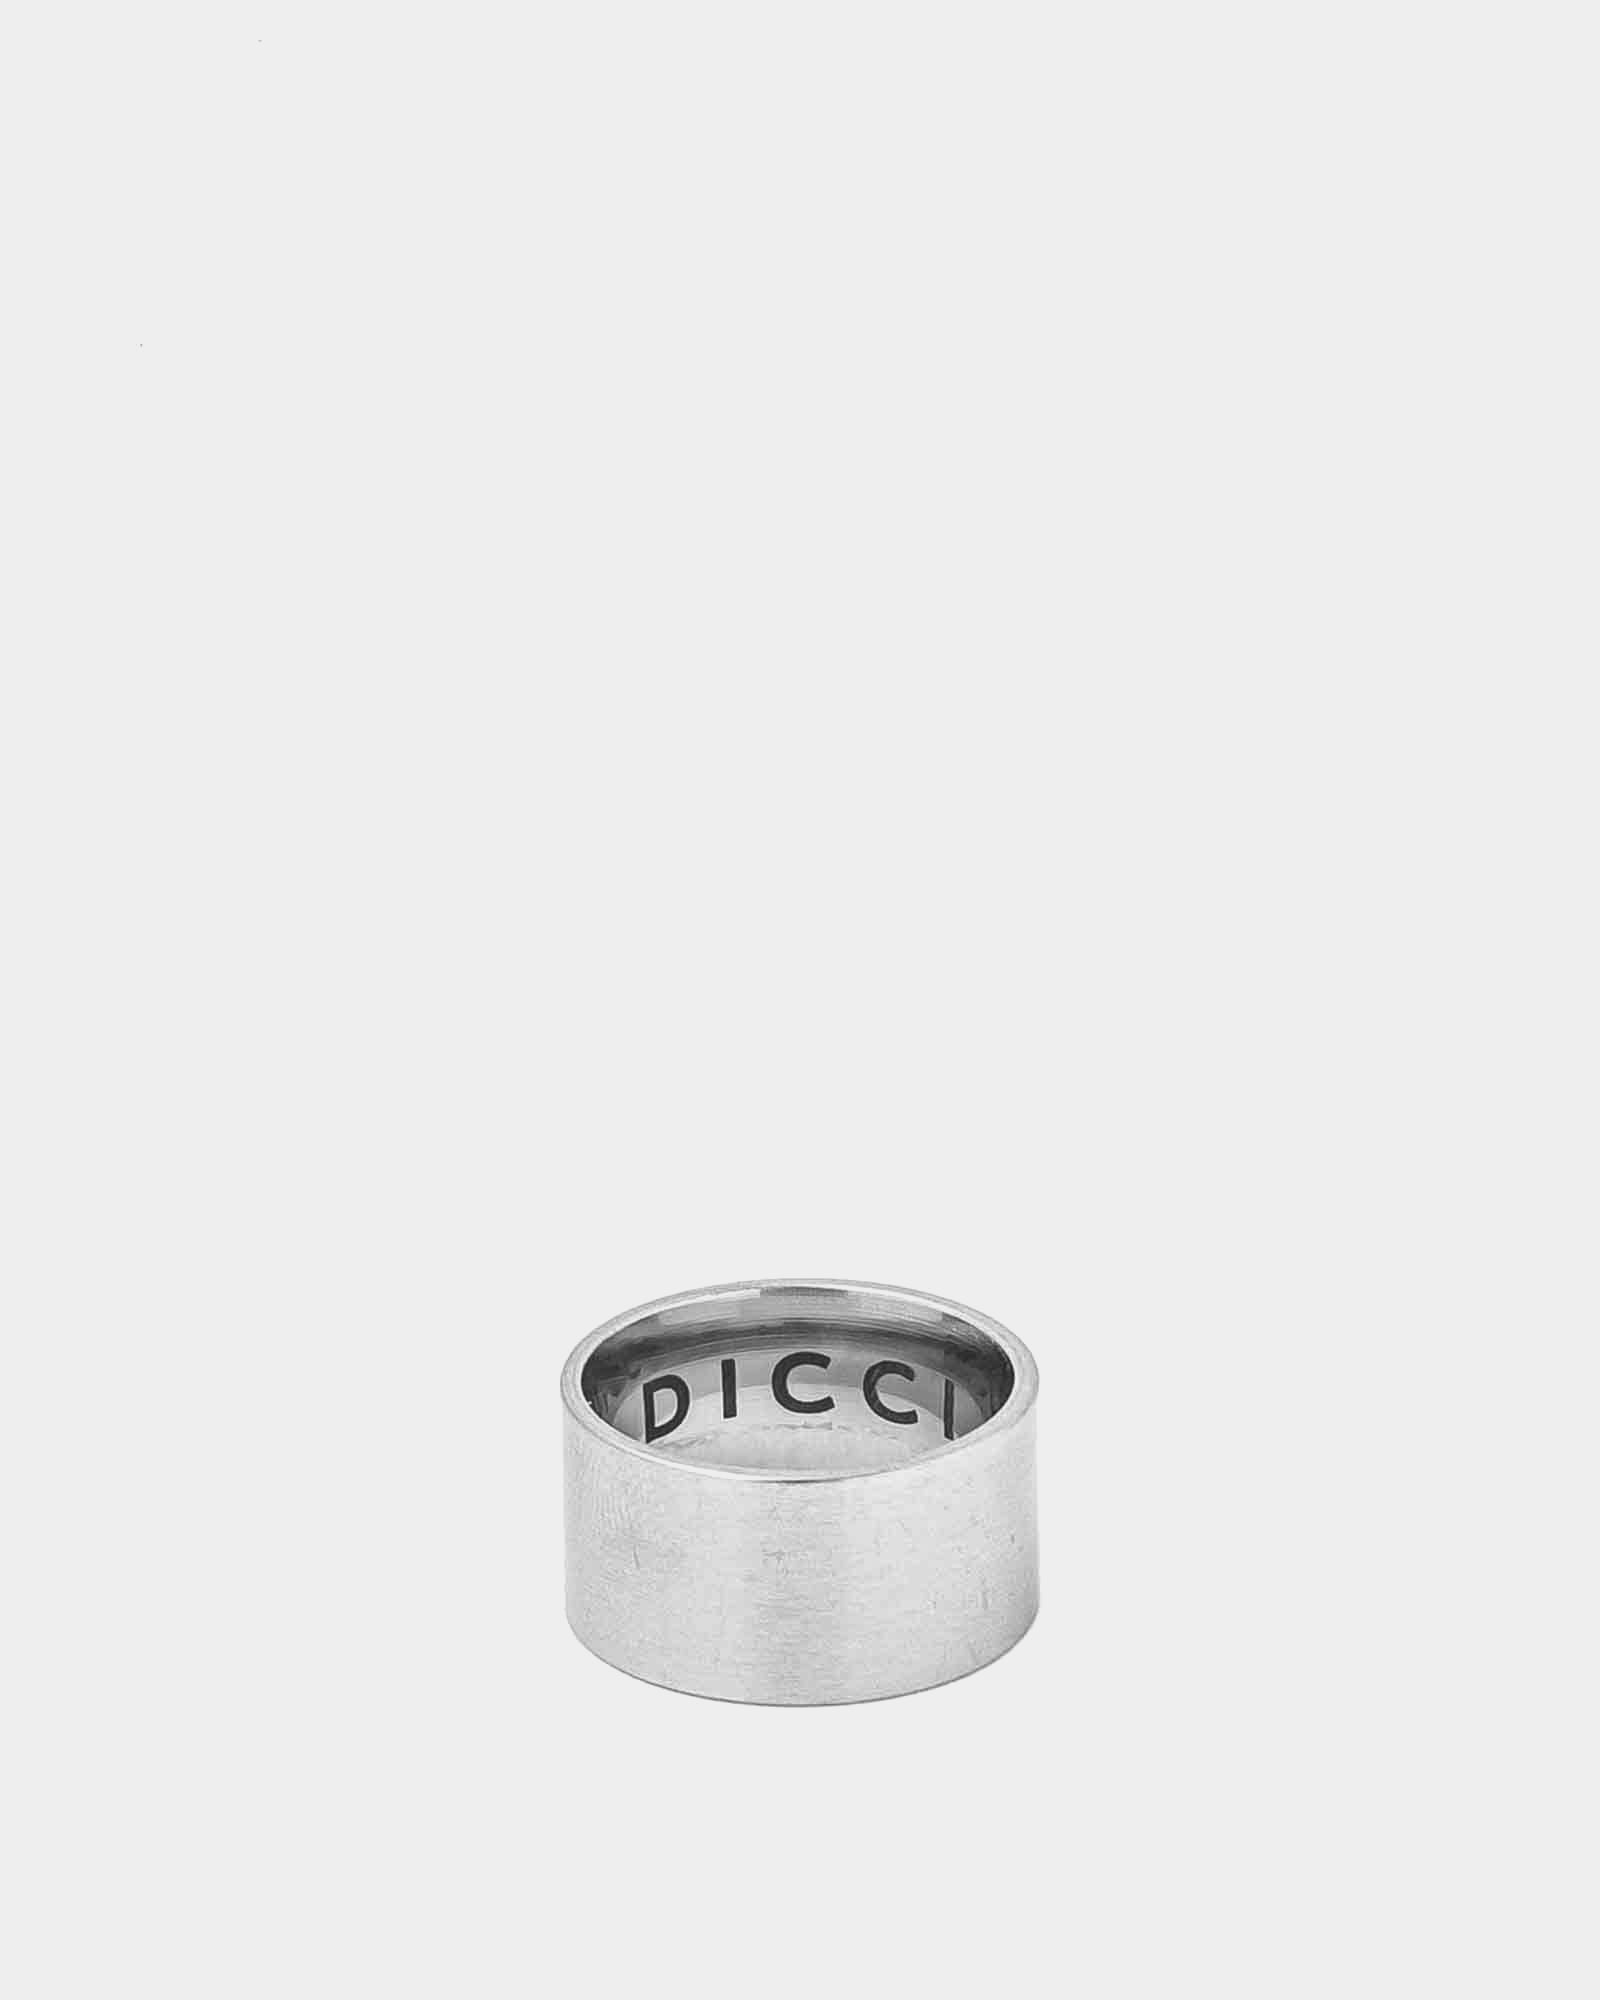 Nut - Stainless Steel Ring 'Nut' - Minimal Stainless Steel Ring - Laser engraving of the Dicci logo inside - Online Unissex Jewelry - Dicci